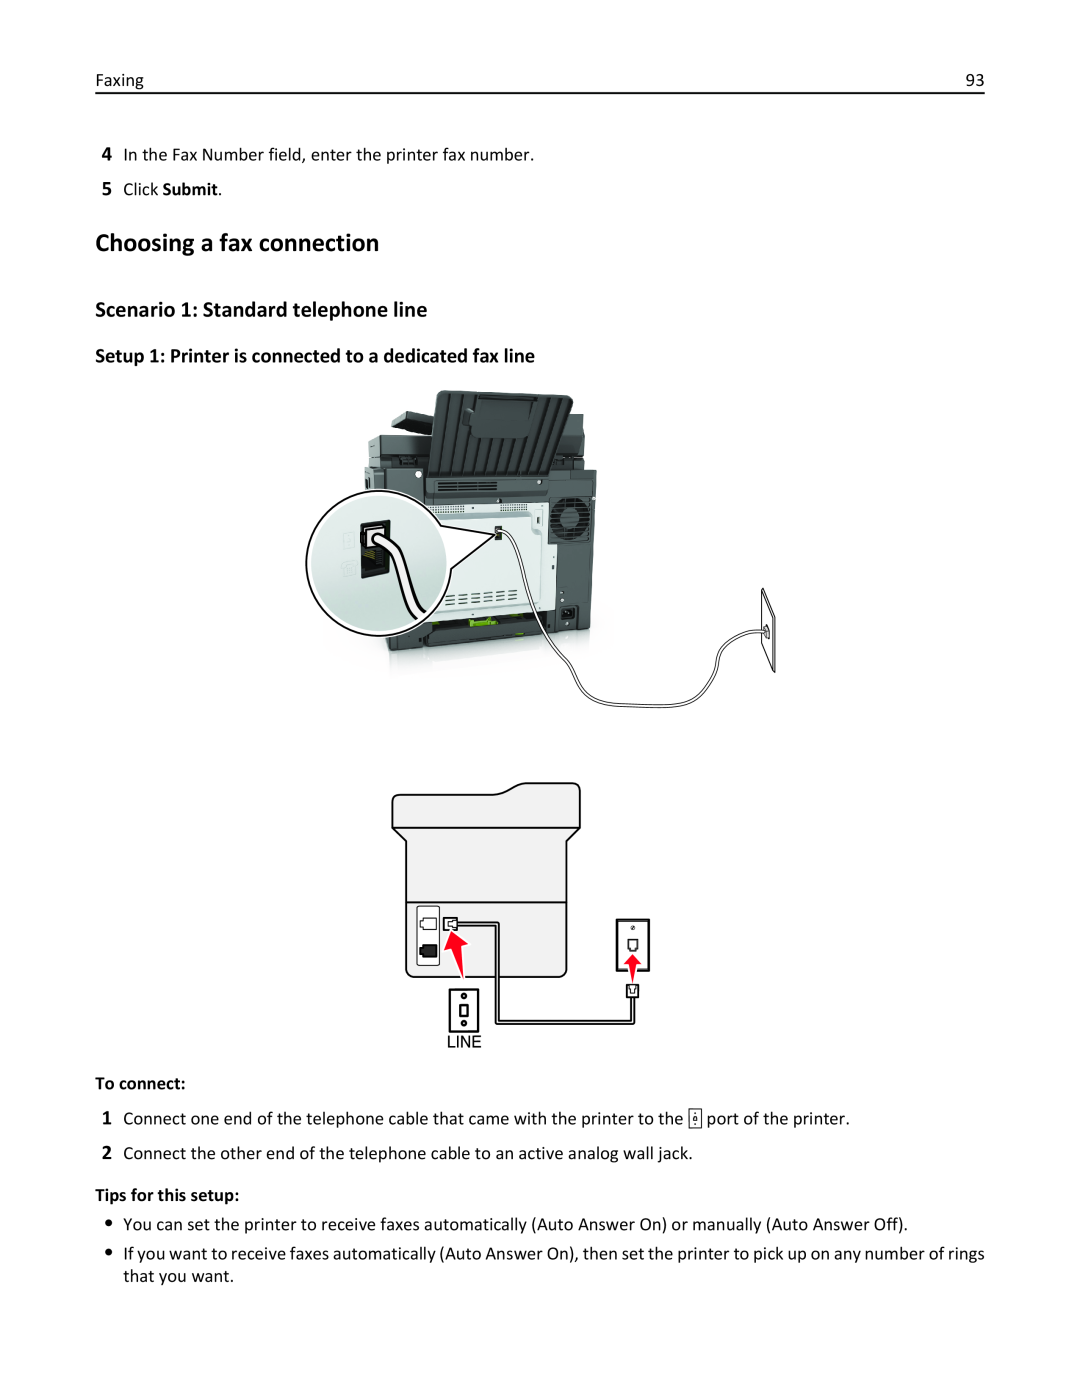 Lexmark 436 manual Choosing a fax connection, Scenario 1 Standard telephone line, To connect, Tips for this setup 